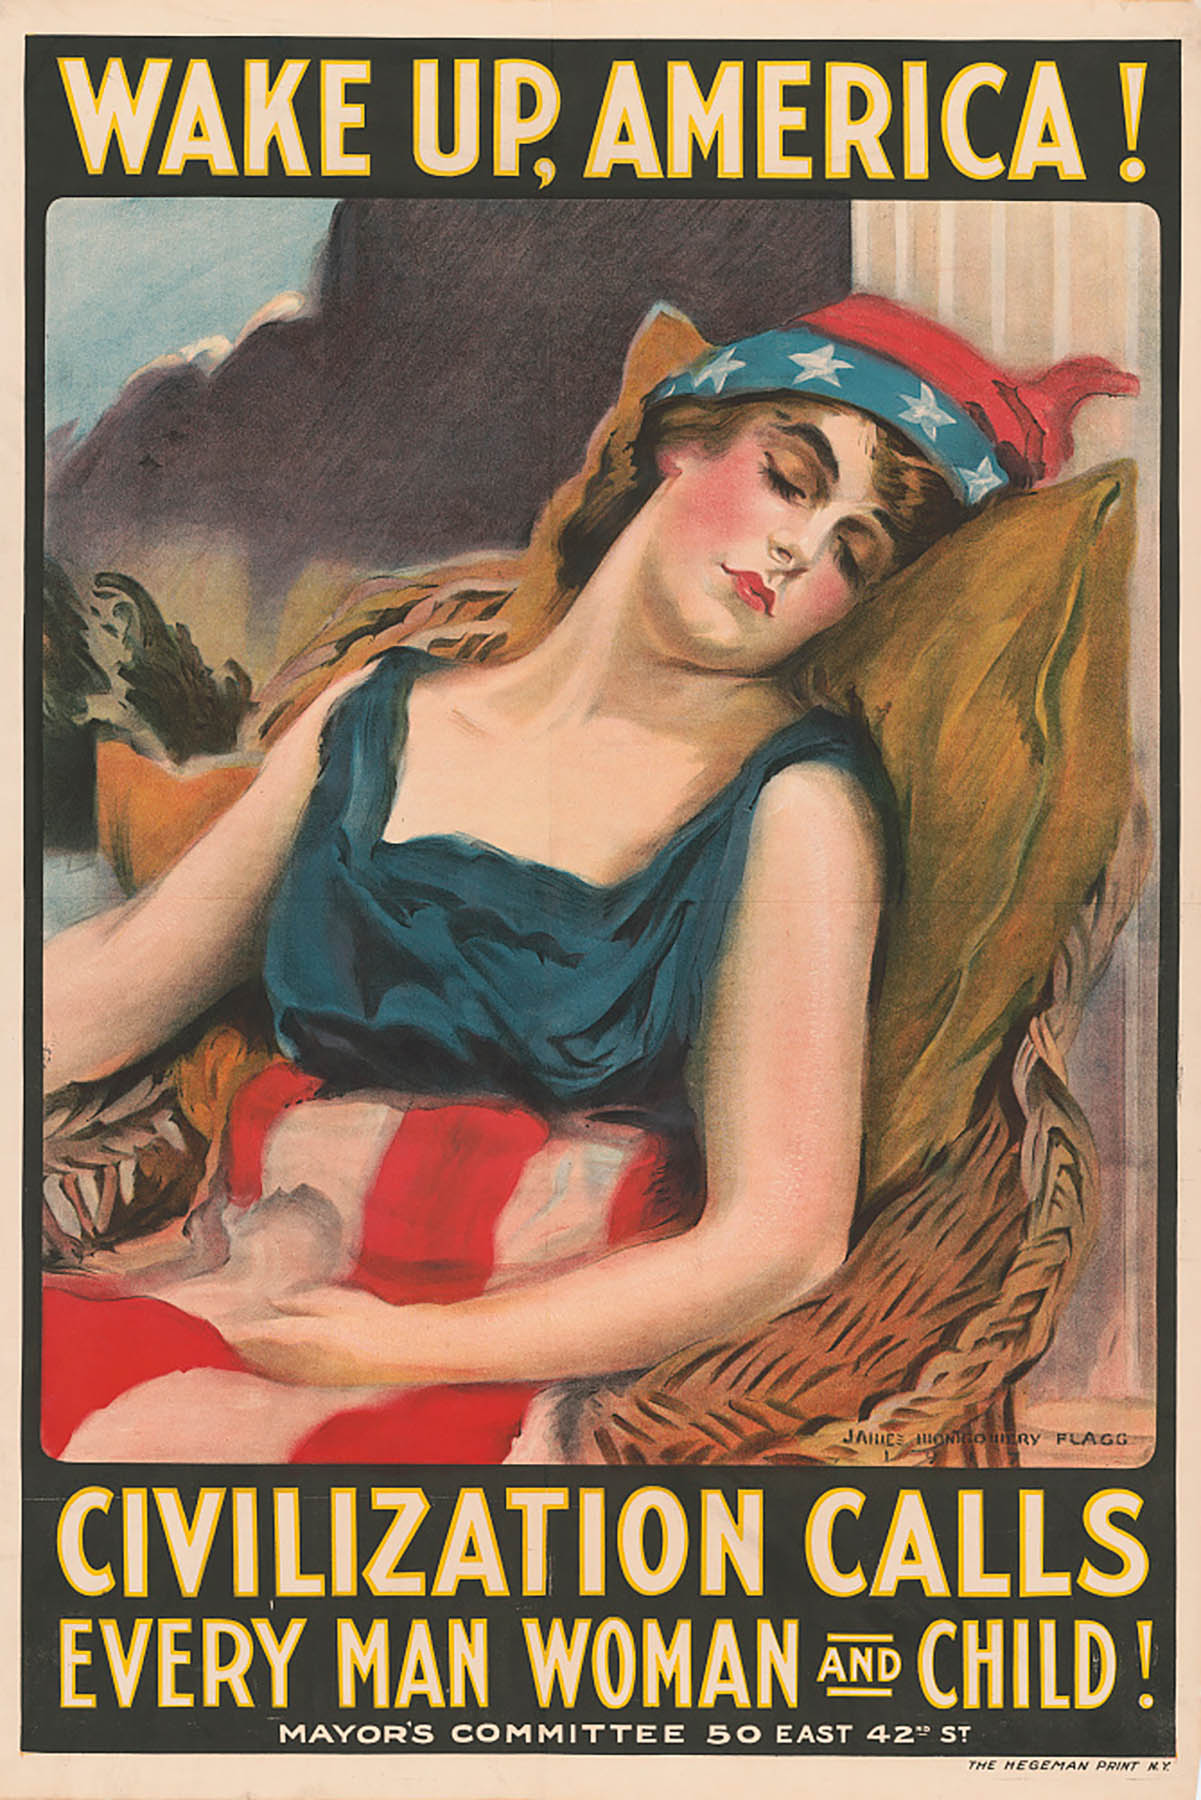 James Montgomery, Wake up America! Civilization Calls Every Man, Woman and Child!, 1917, Courtesy of Library of Congress, Flagg.